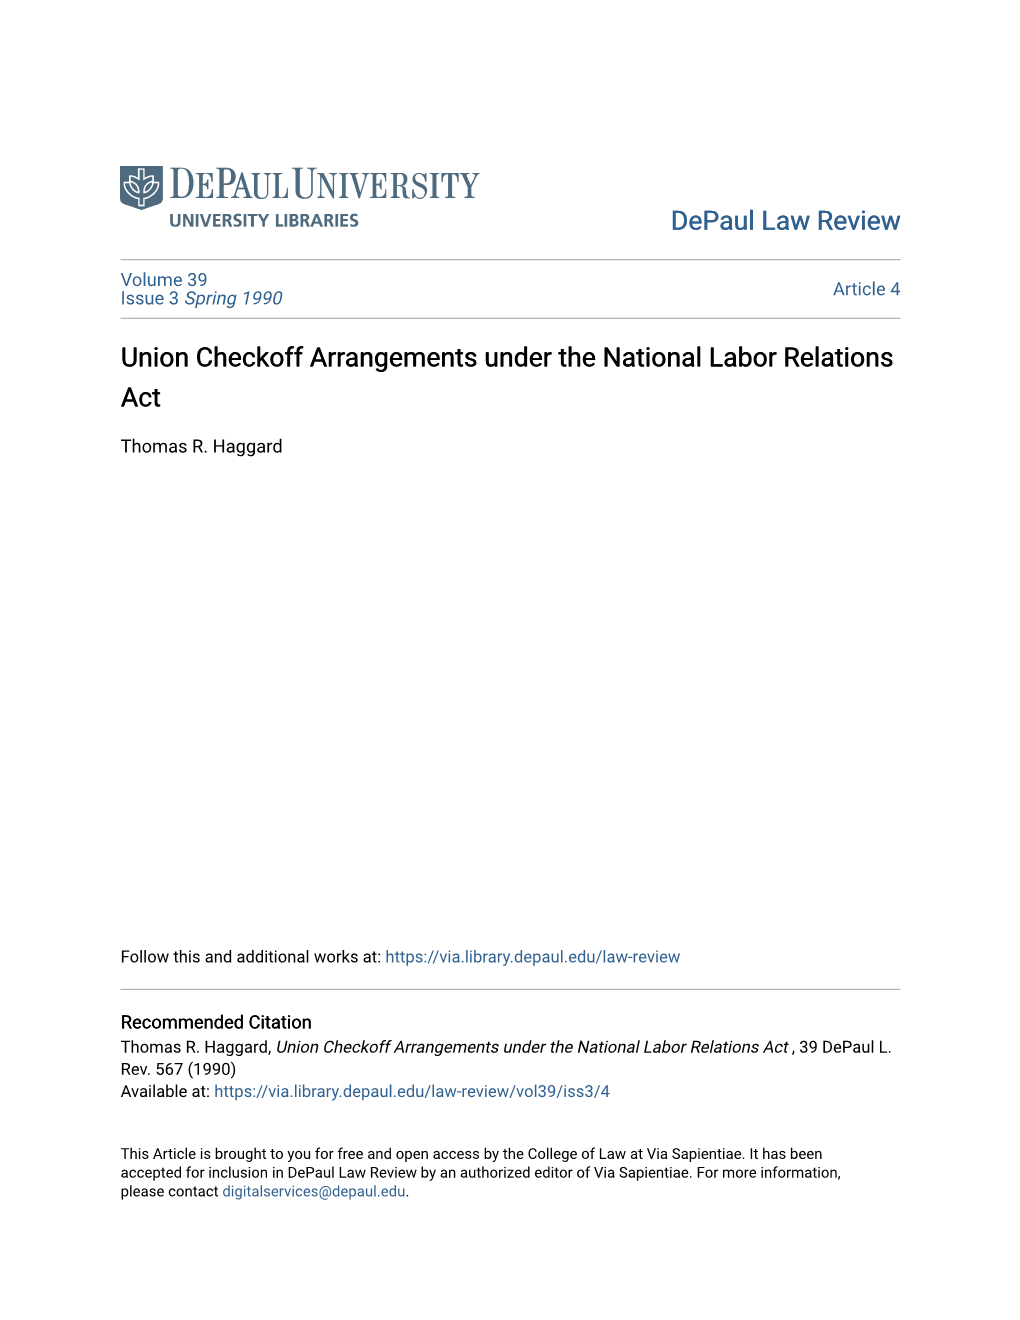 Union Checkoff Arrangements Under the National Labor Relations Act